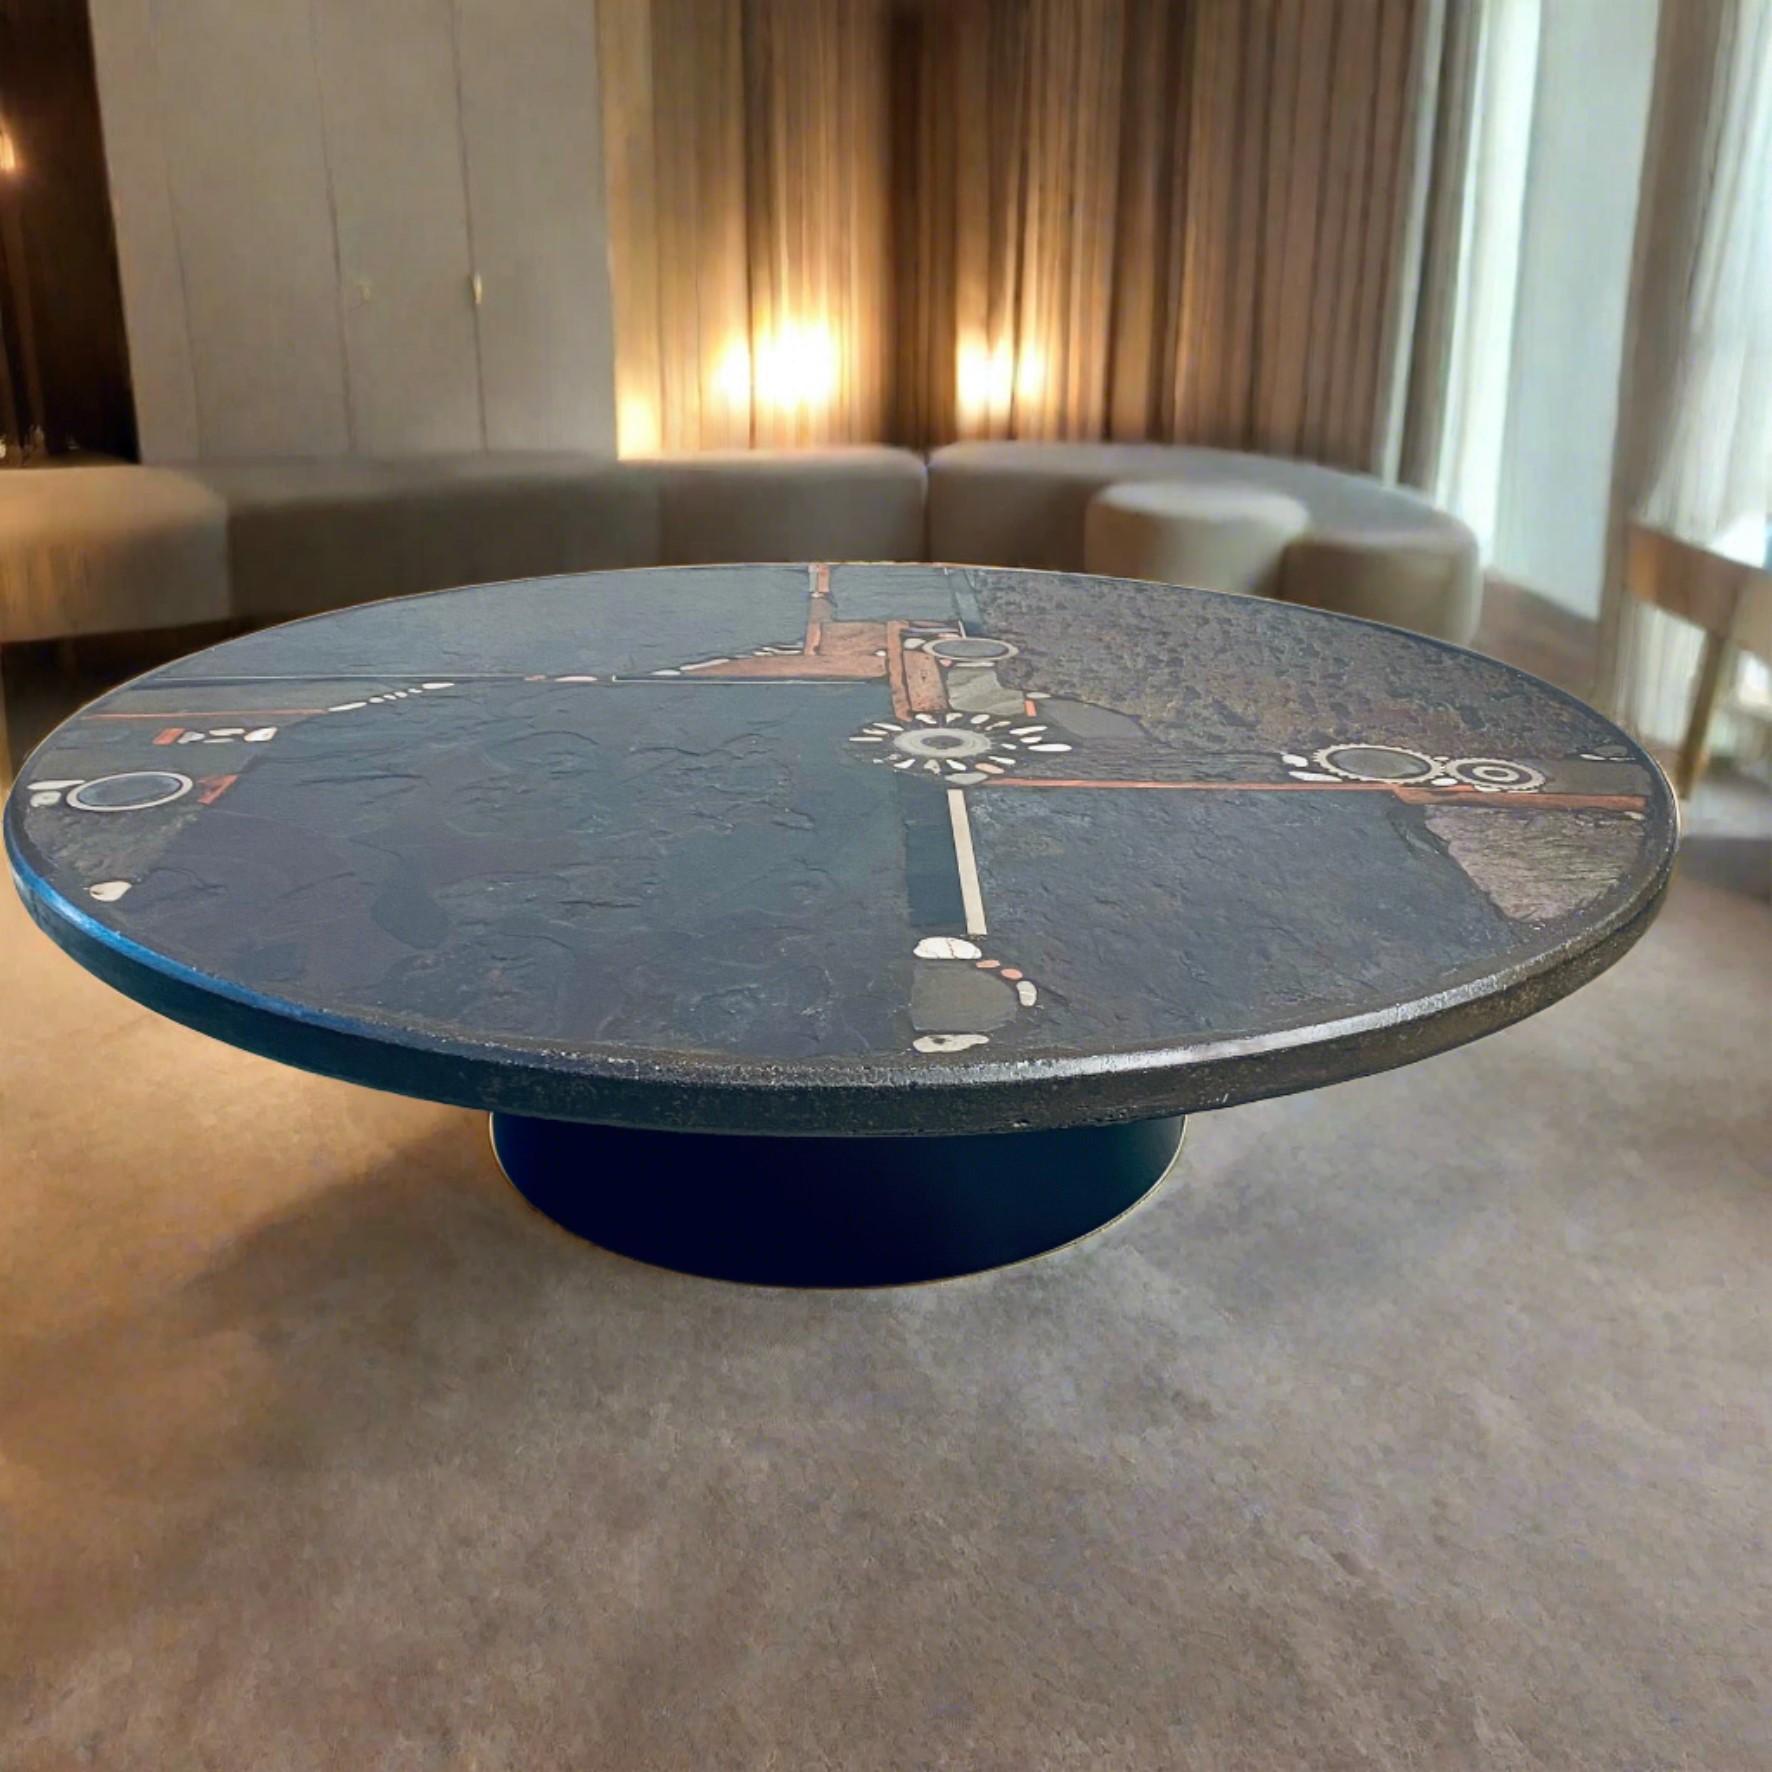 Brutalist coffee table designed and made by Paul Kingma, The Netherlands 1985.

Introducing the Brutalist Round Coffee Table by renowned sculptor Paul Kingma, crafted in the Netherlands in 1984. This iconic piece is a testament to Kingma's unique